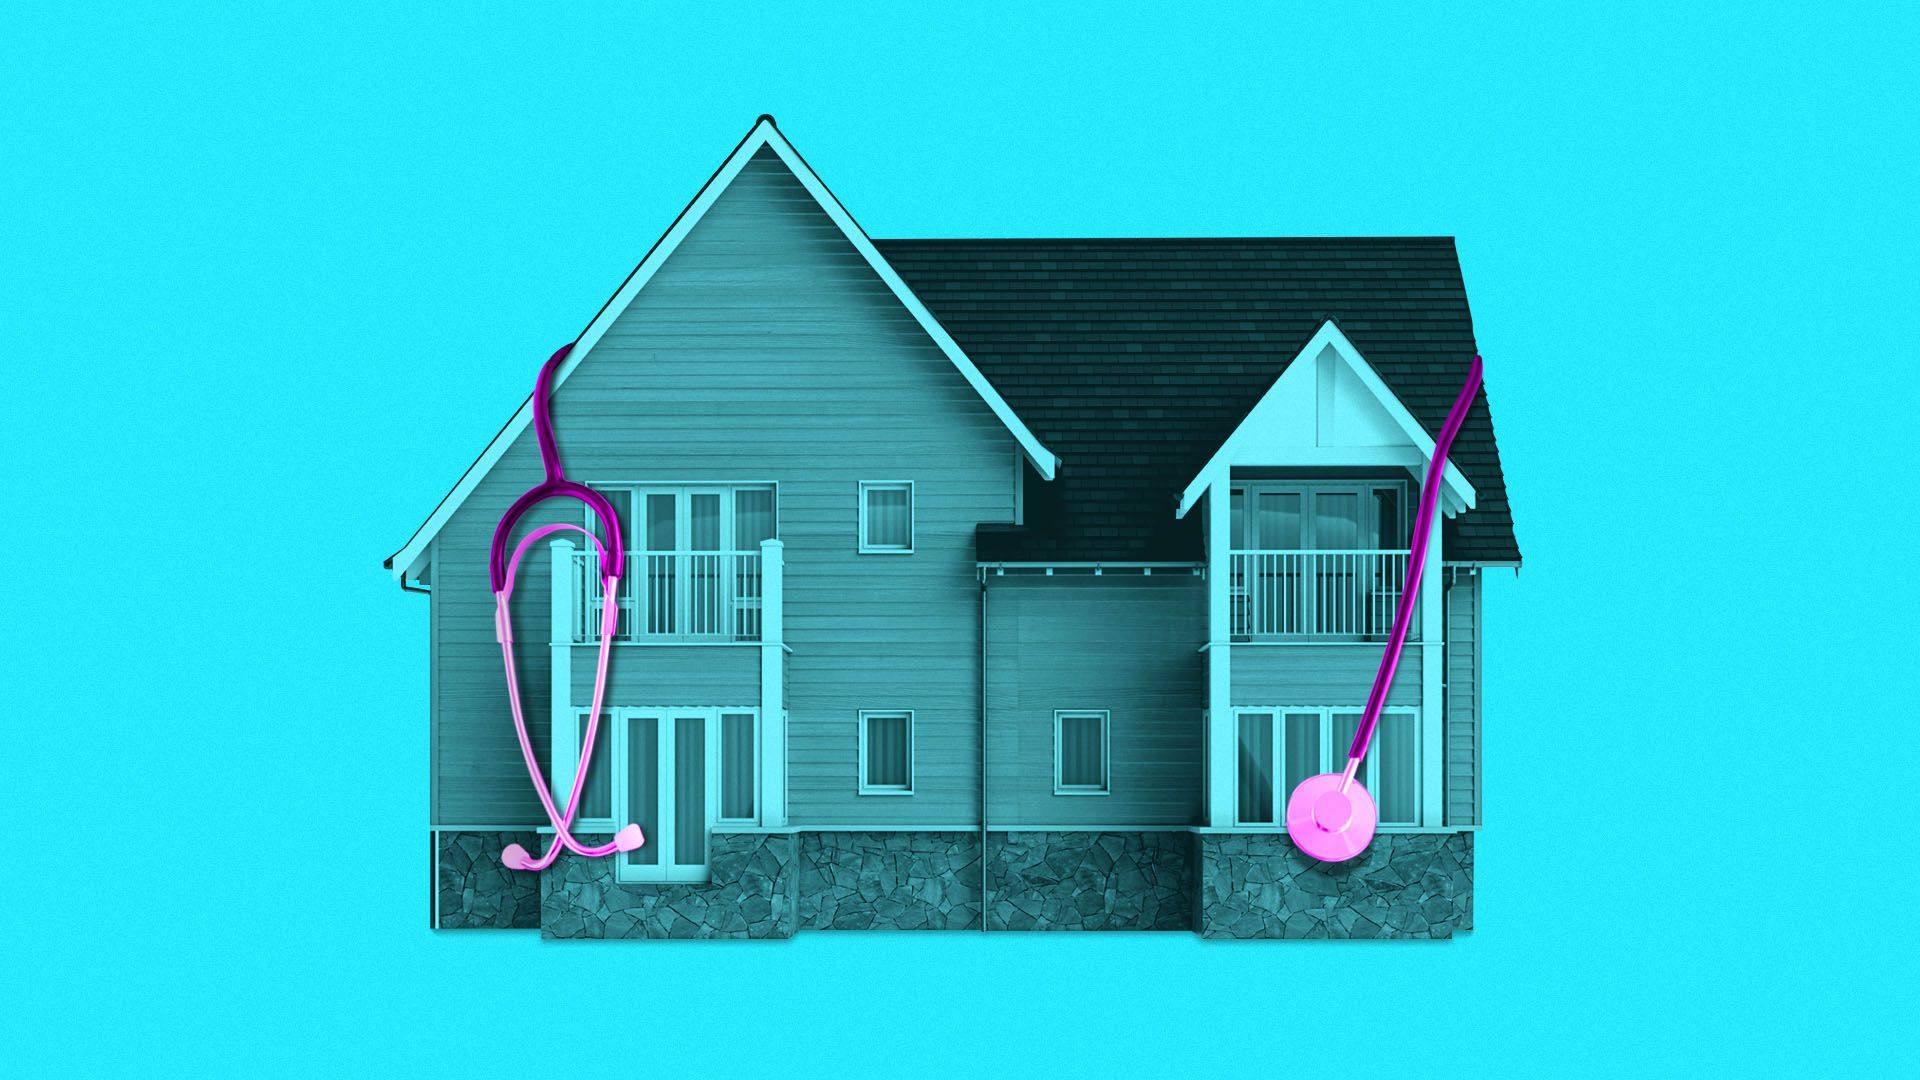 Illustration of a house wearing a stethoscope